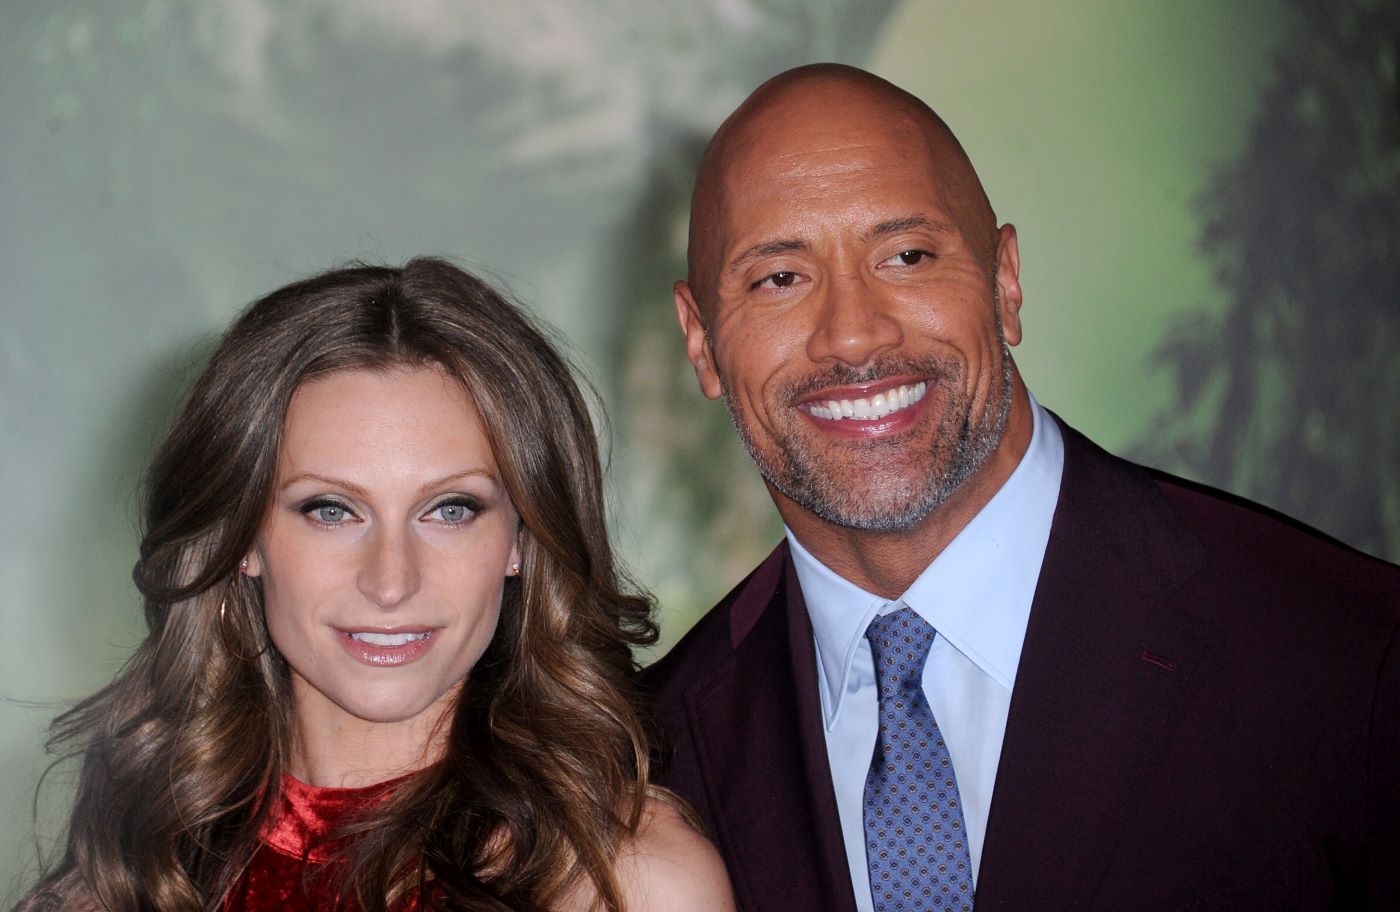 Dwayne Johnson and wife Lauren Hashian dressed professionally in front of a green background.